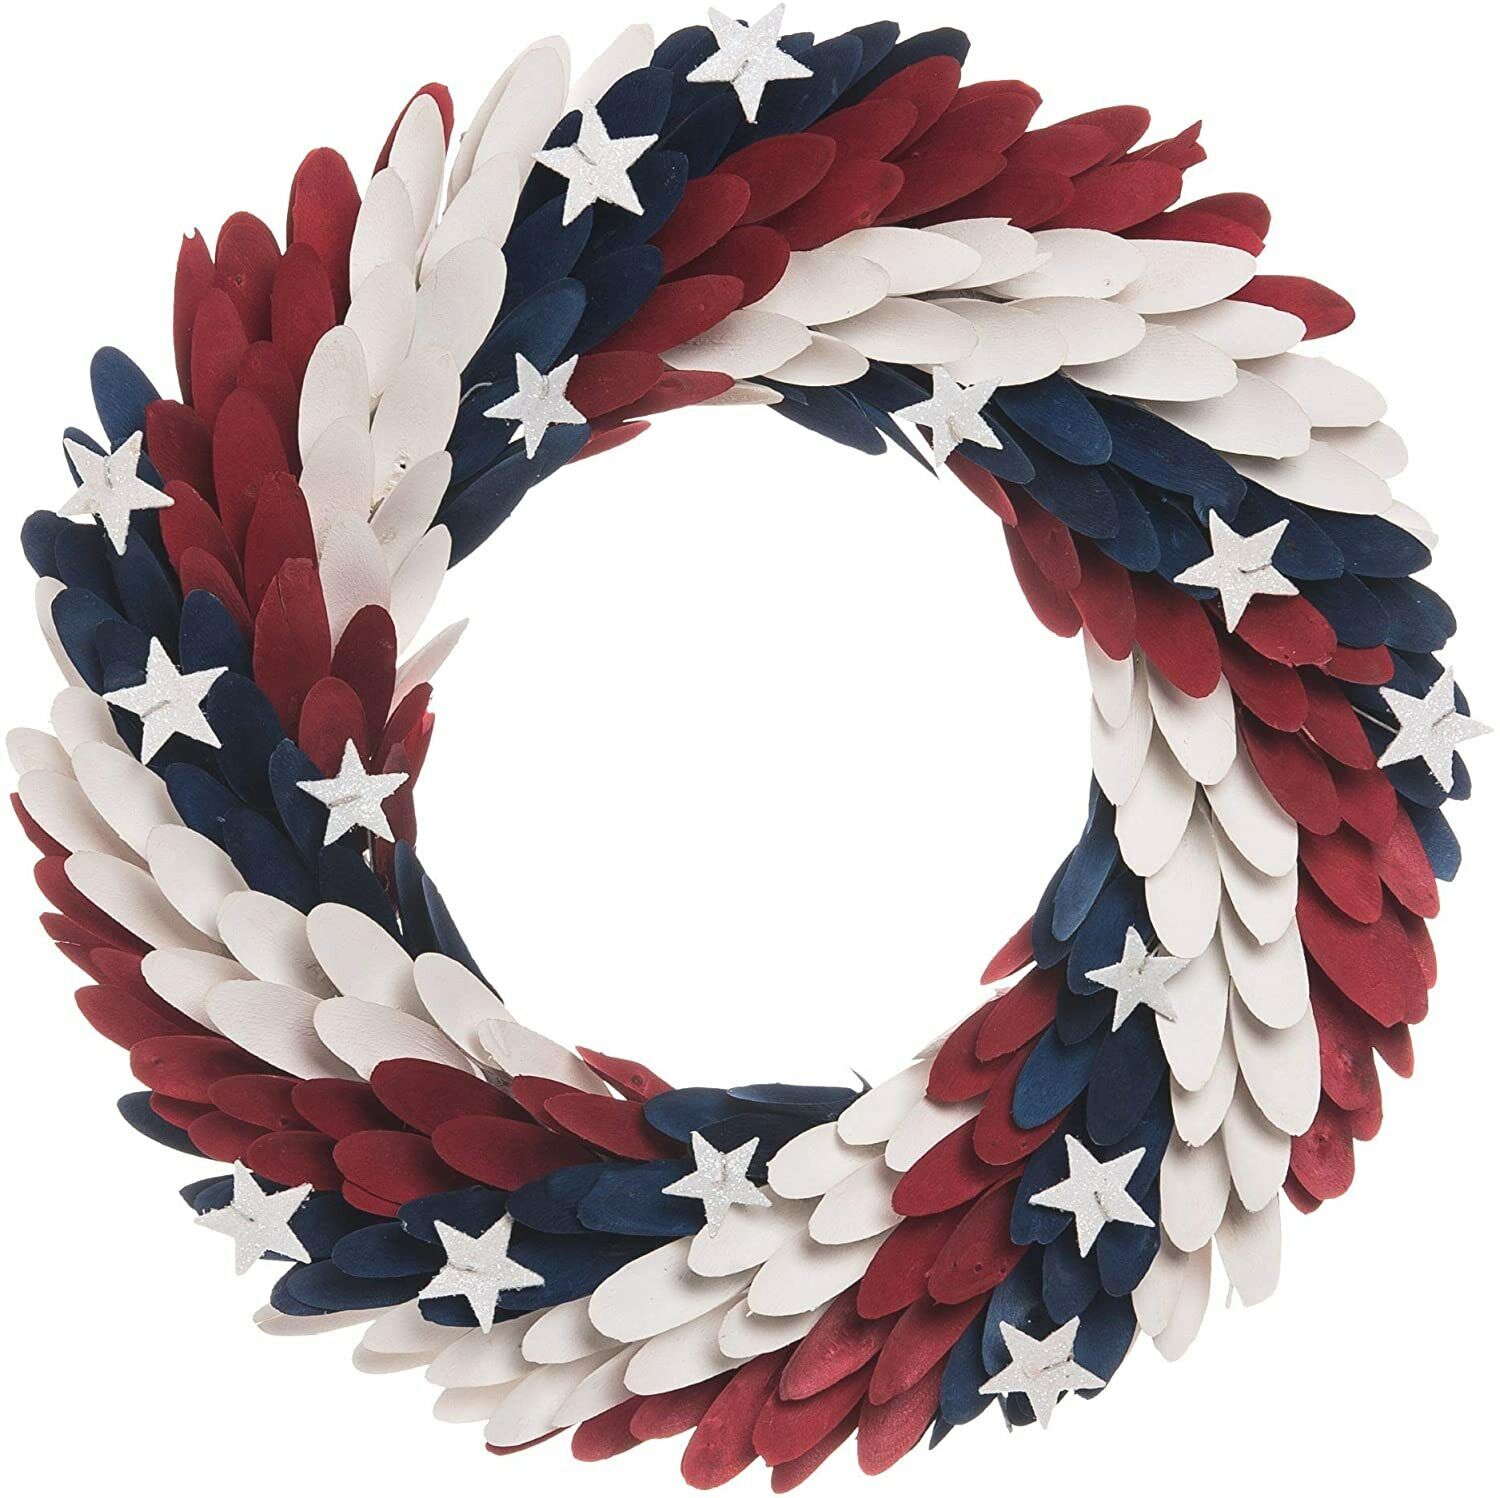 Patriotic USA Styrofoam Wood Curl Wreath for Labor Day, Memorial Day (a) M5